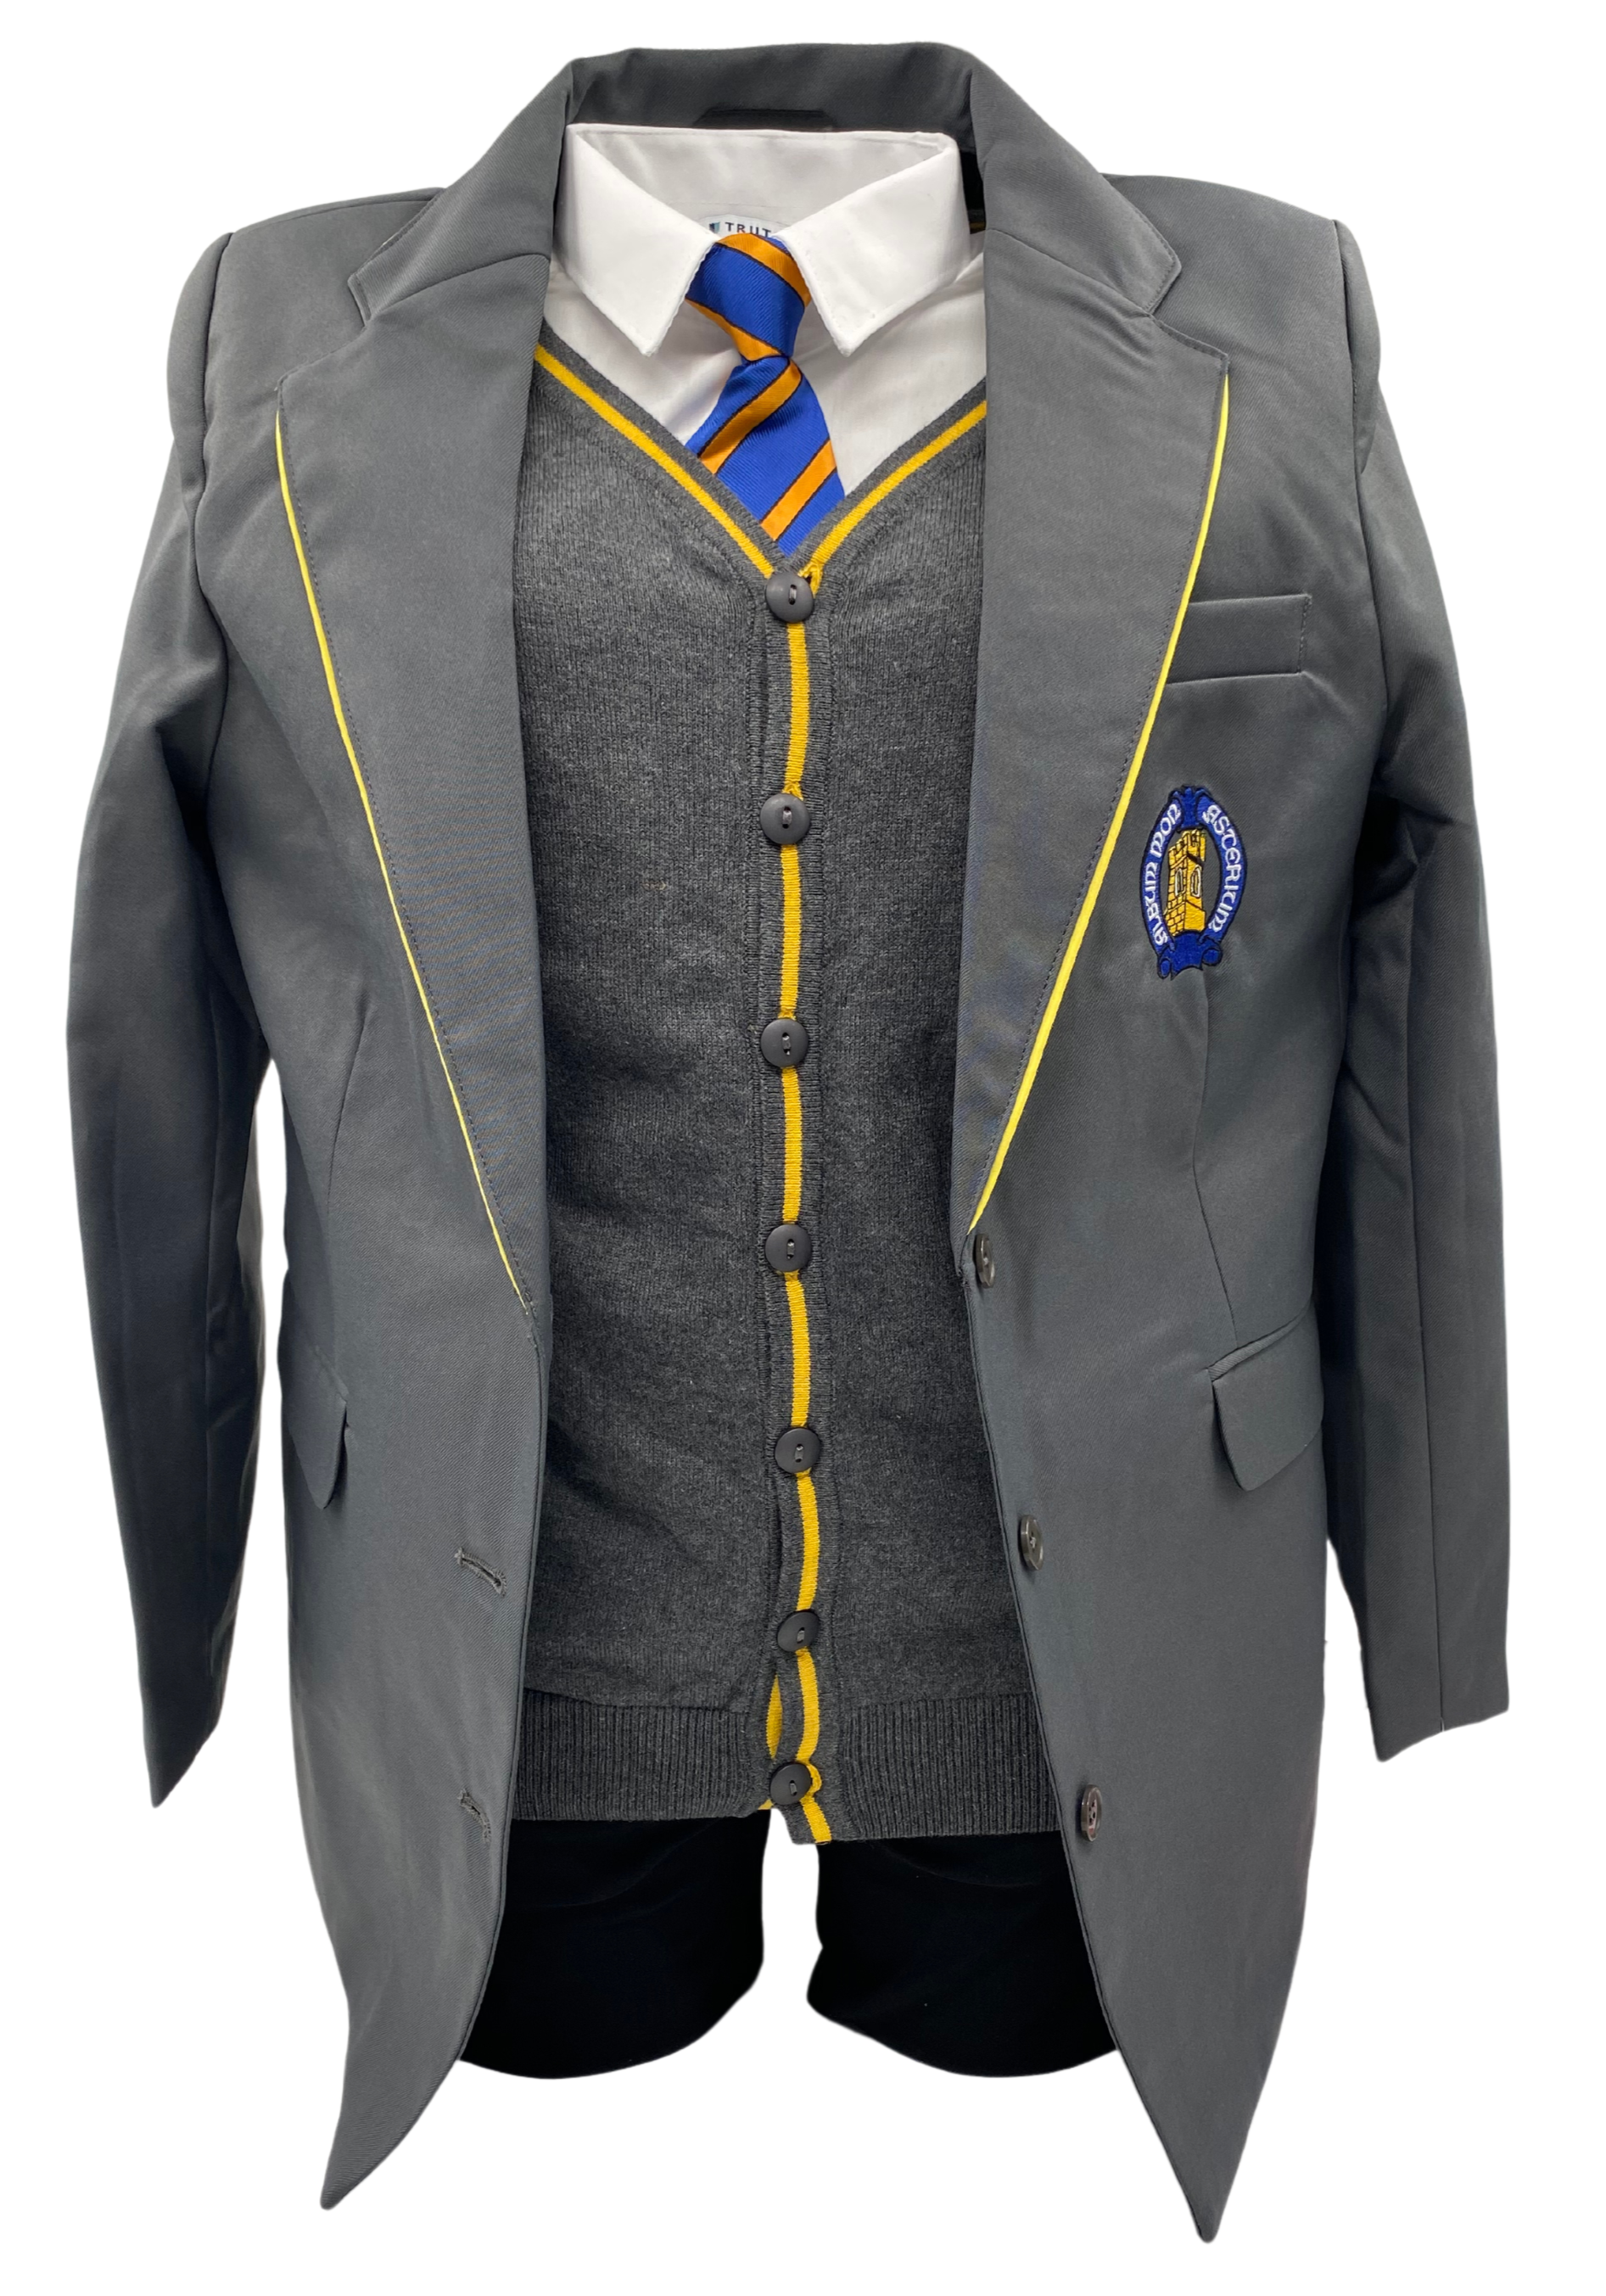 Whitchurch High School Blazer (Fitted)